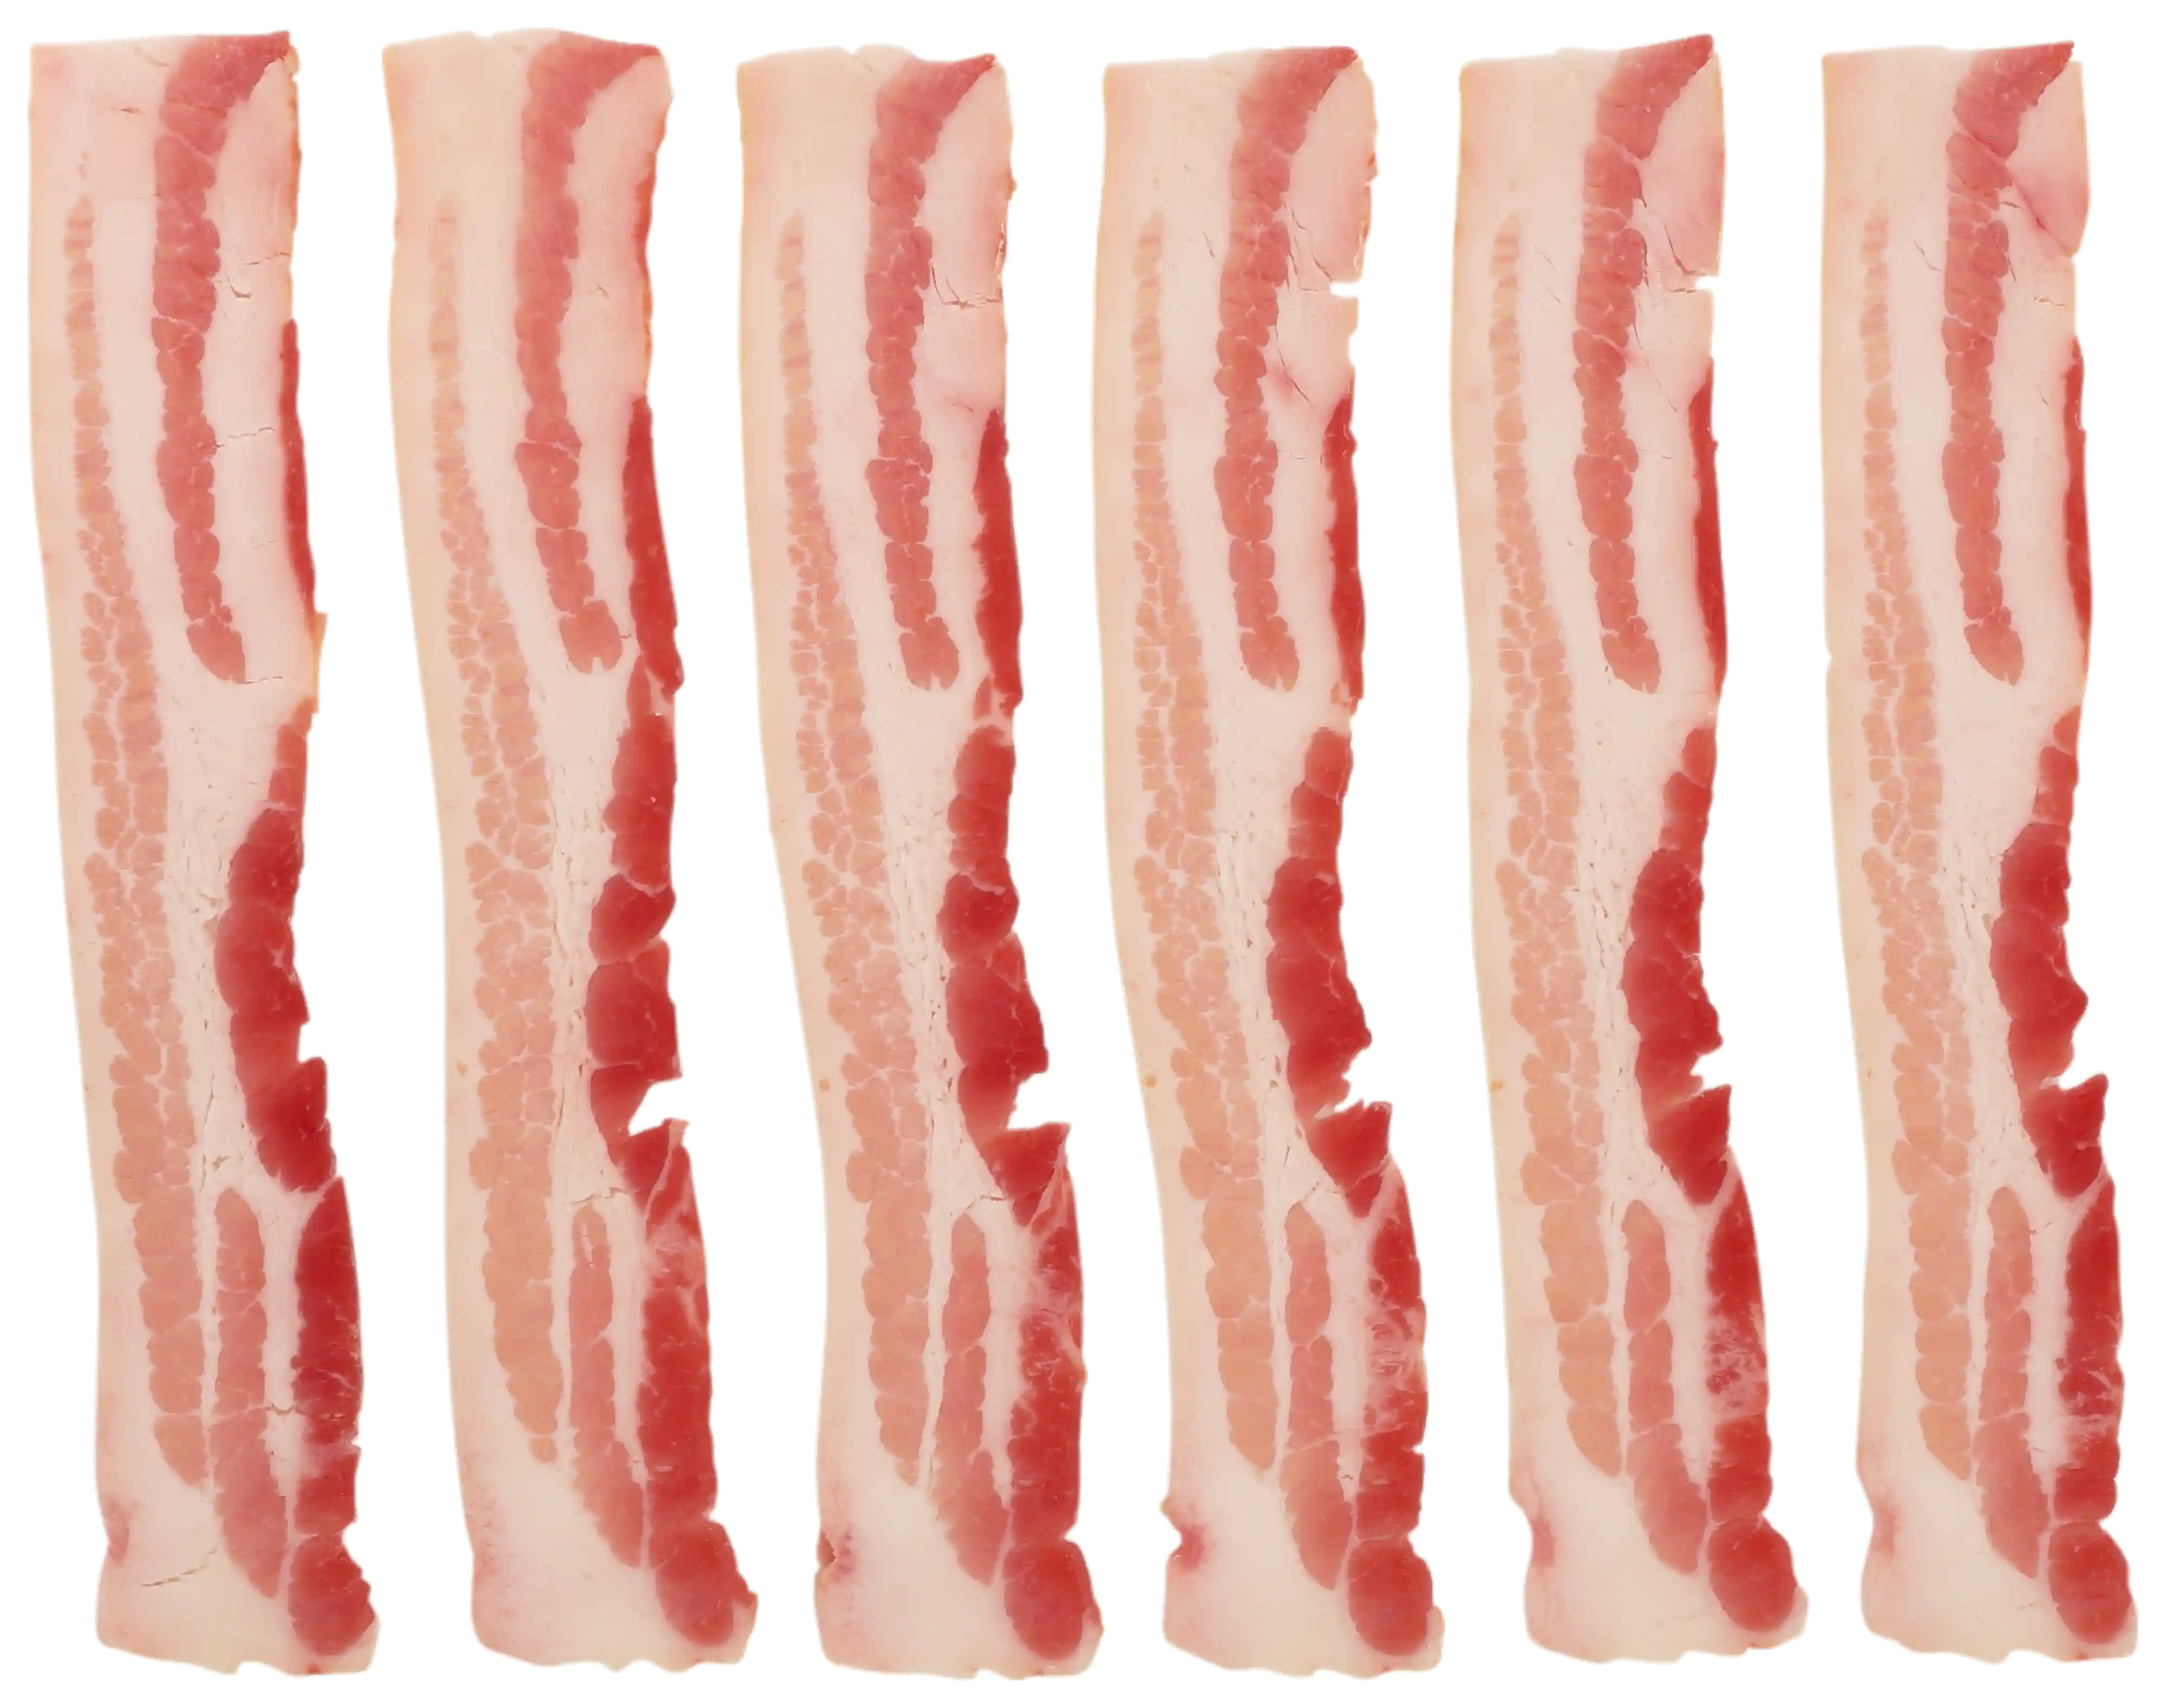 Wright® Brand Naturally Applewood Smoked Regular Sliced Bacon, Bulk, 15 Lbs, 14-18 Slices per Pound, Gas Flushed_image_11